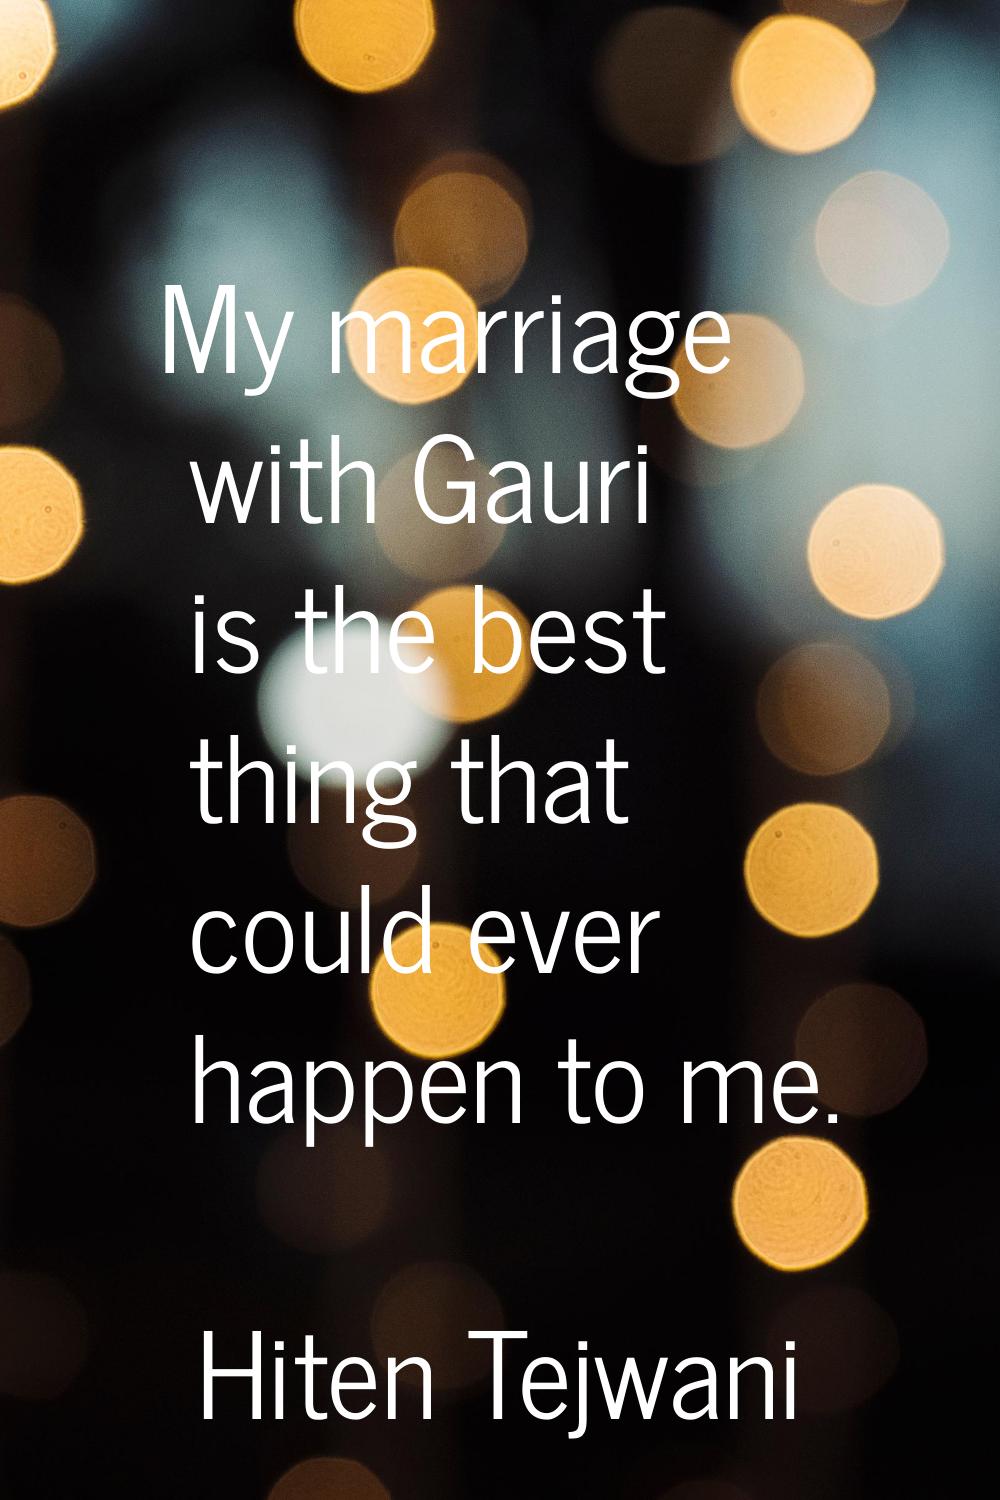 My marriage with Gauri is the best thing that could ever happen to me.